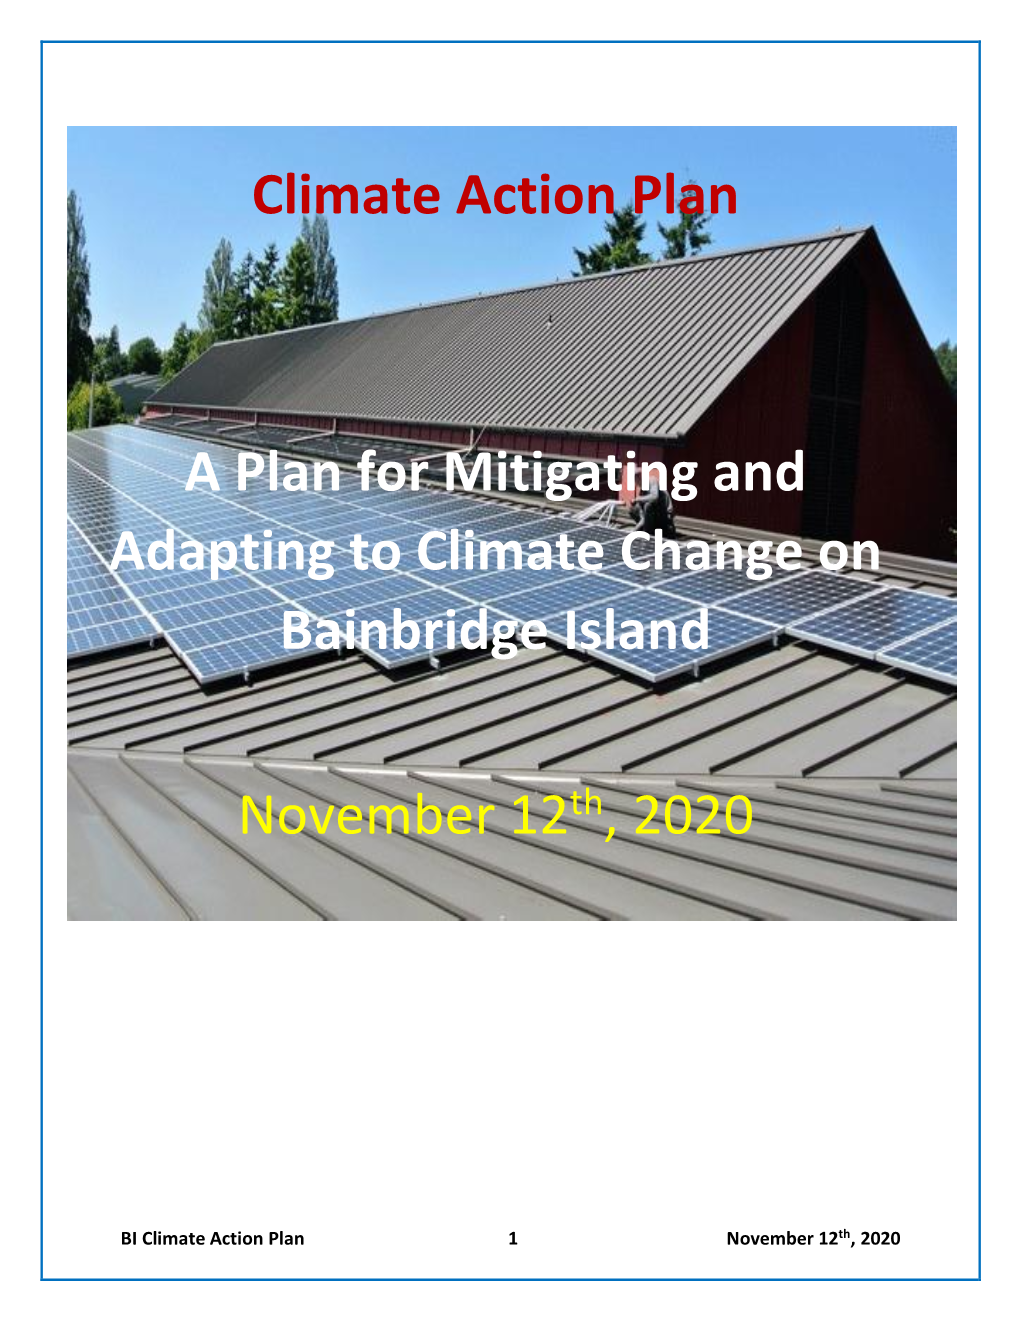 A Plan for Mitigating and Adapting to Climate Change on Bainbridge Island